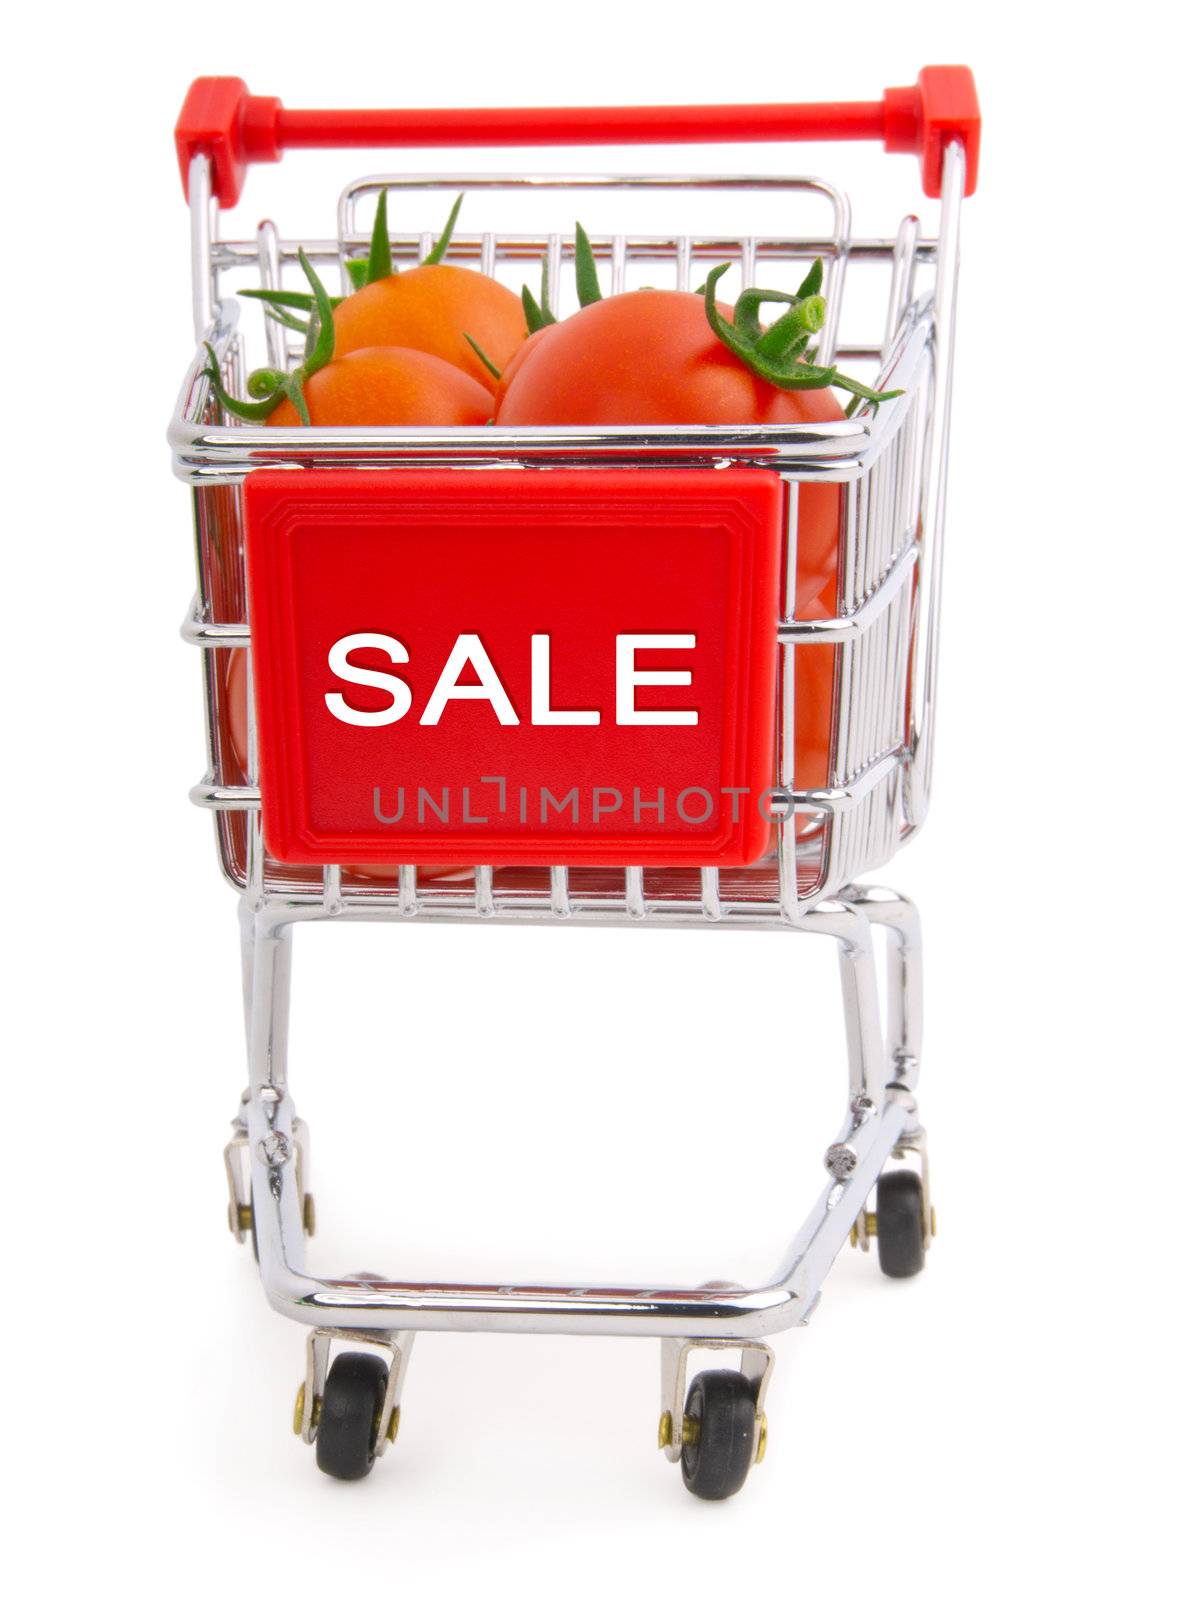 a Shopping cart full of tomatoes on a white background  by motorolka